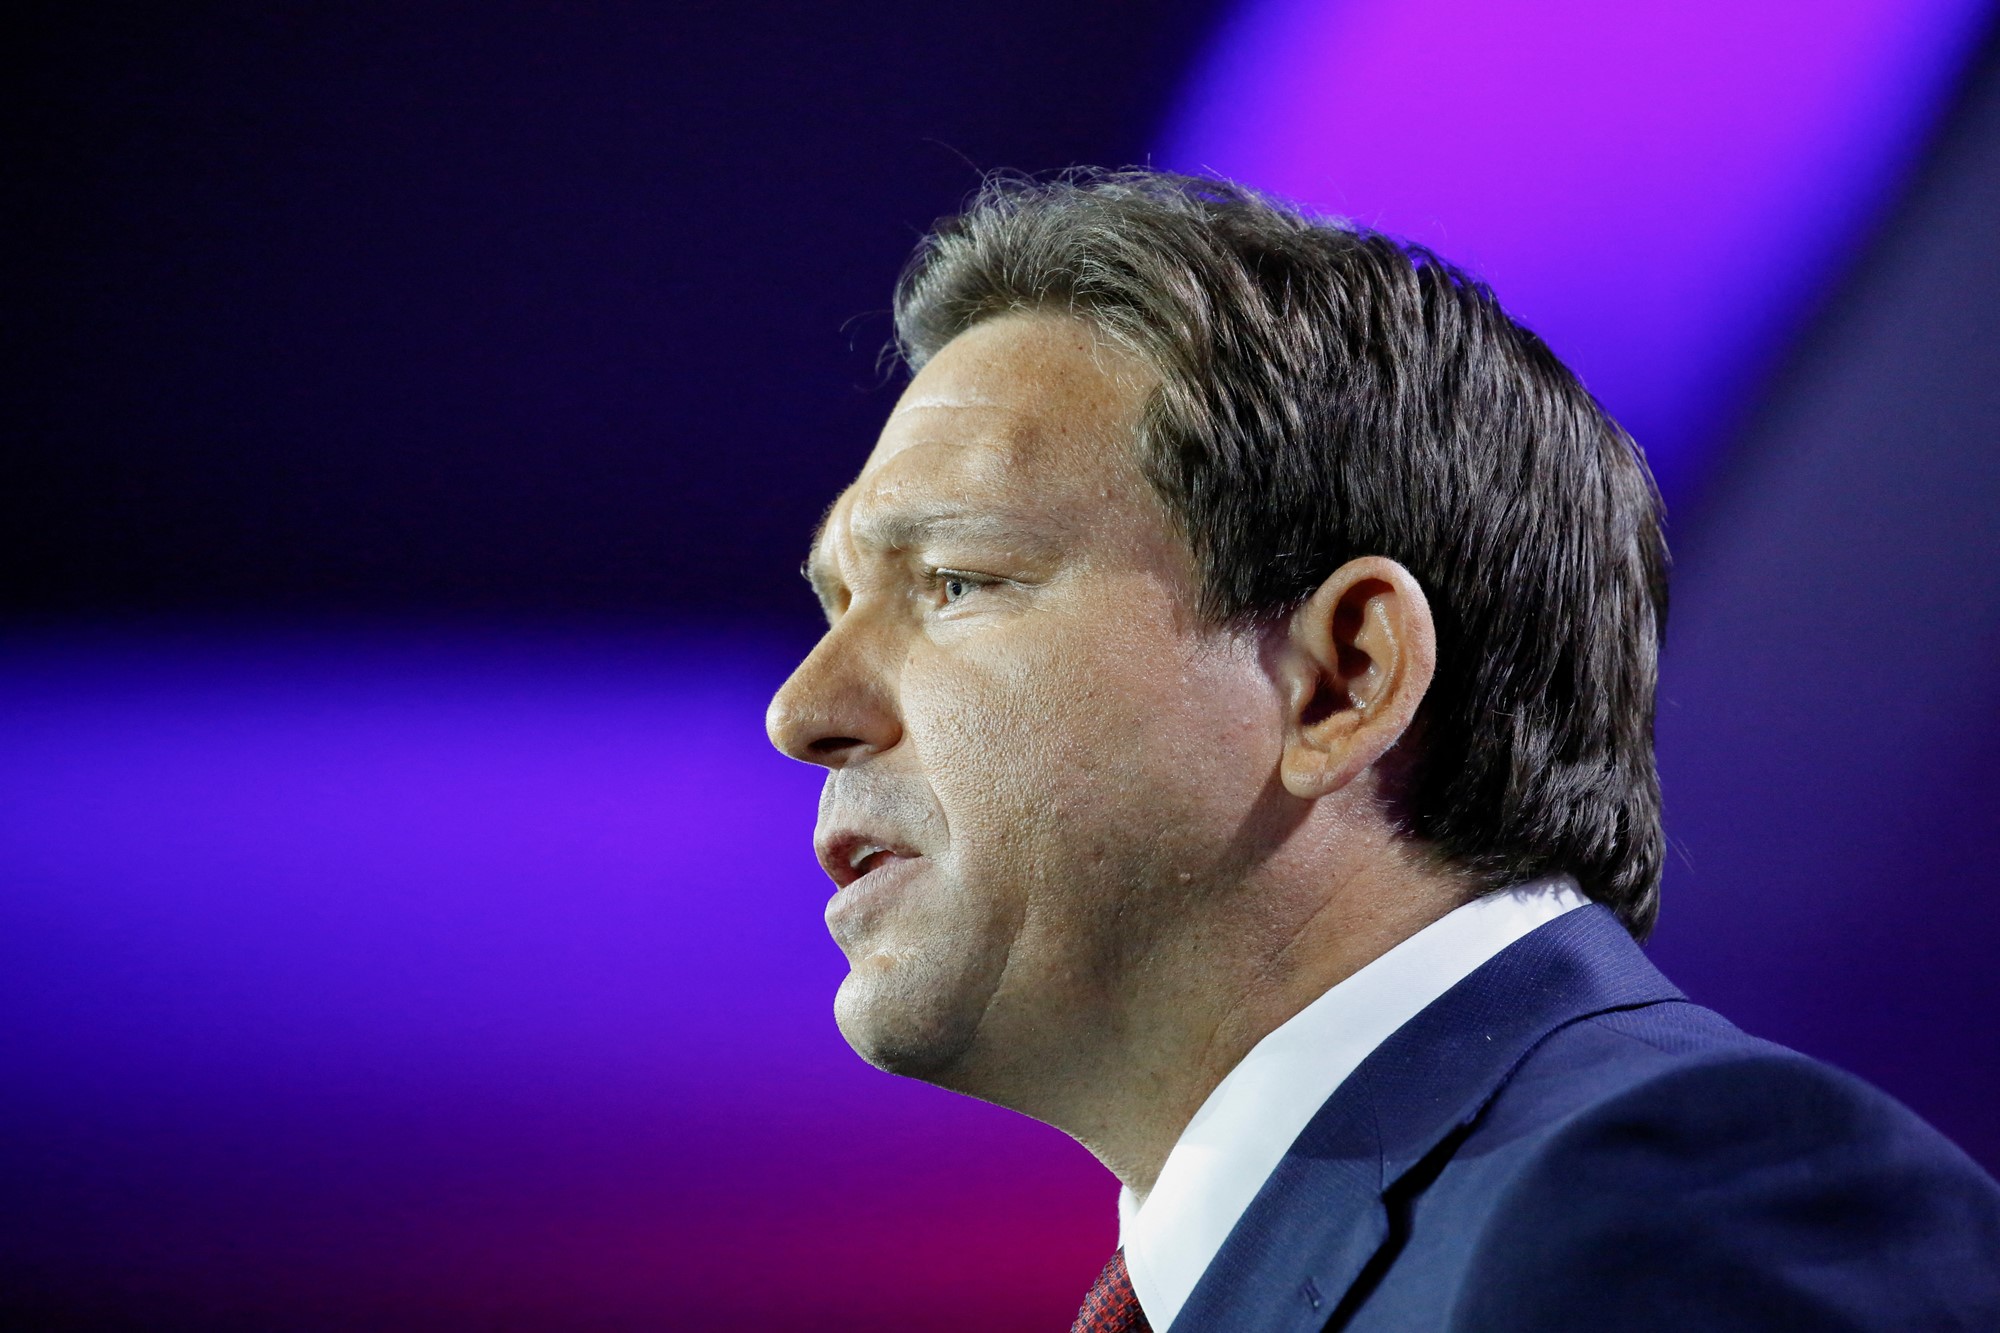 Governor Ron DeSantis speaks to an audience after the US midterm elections